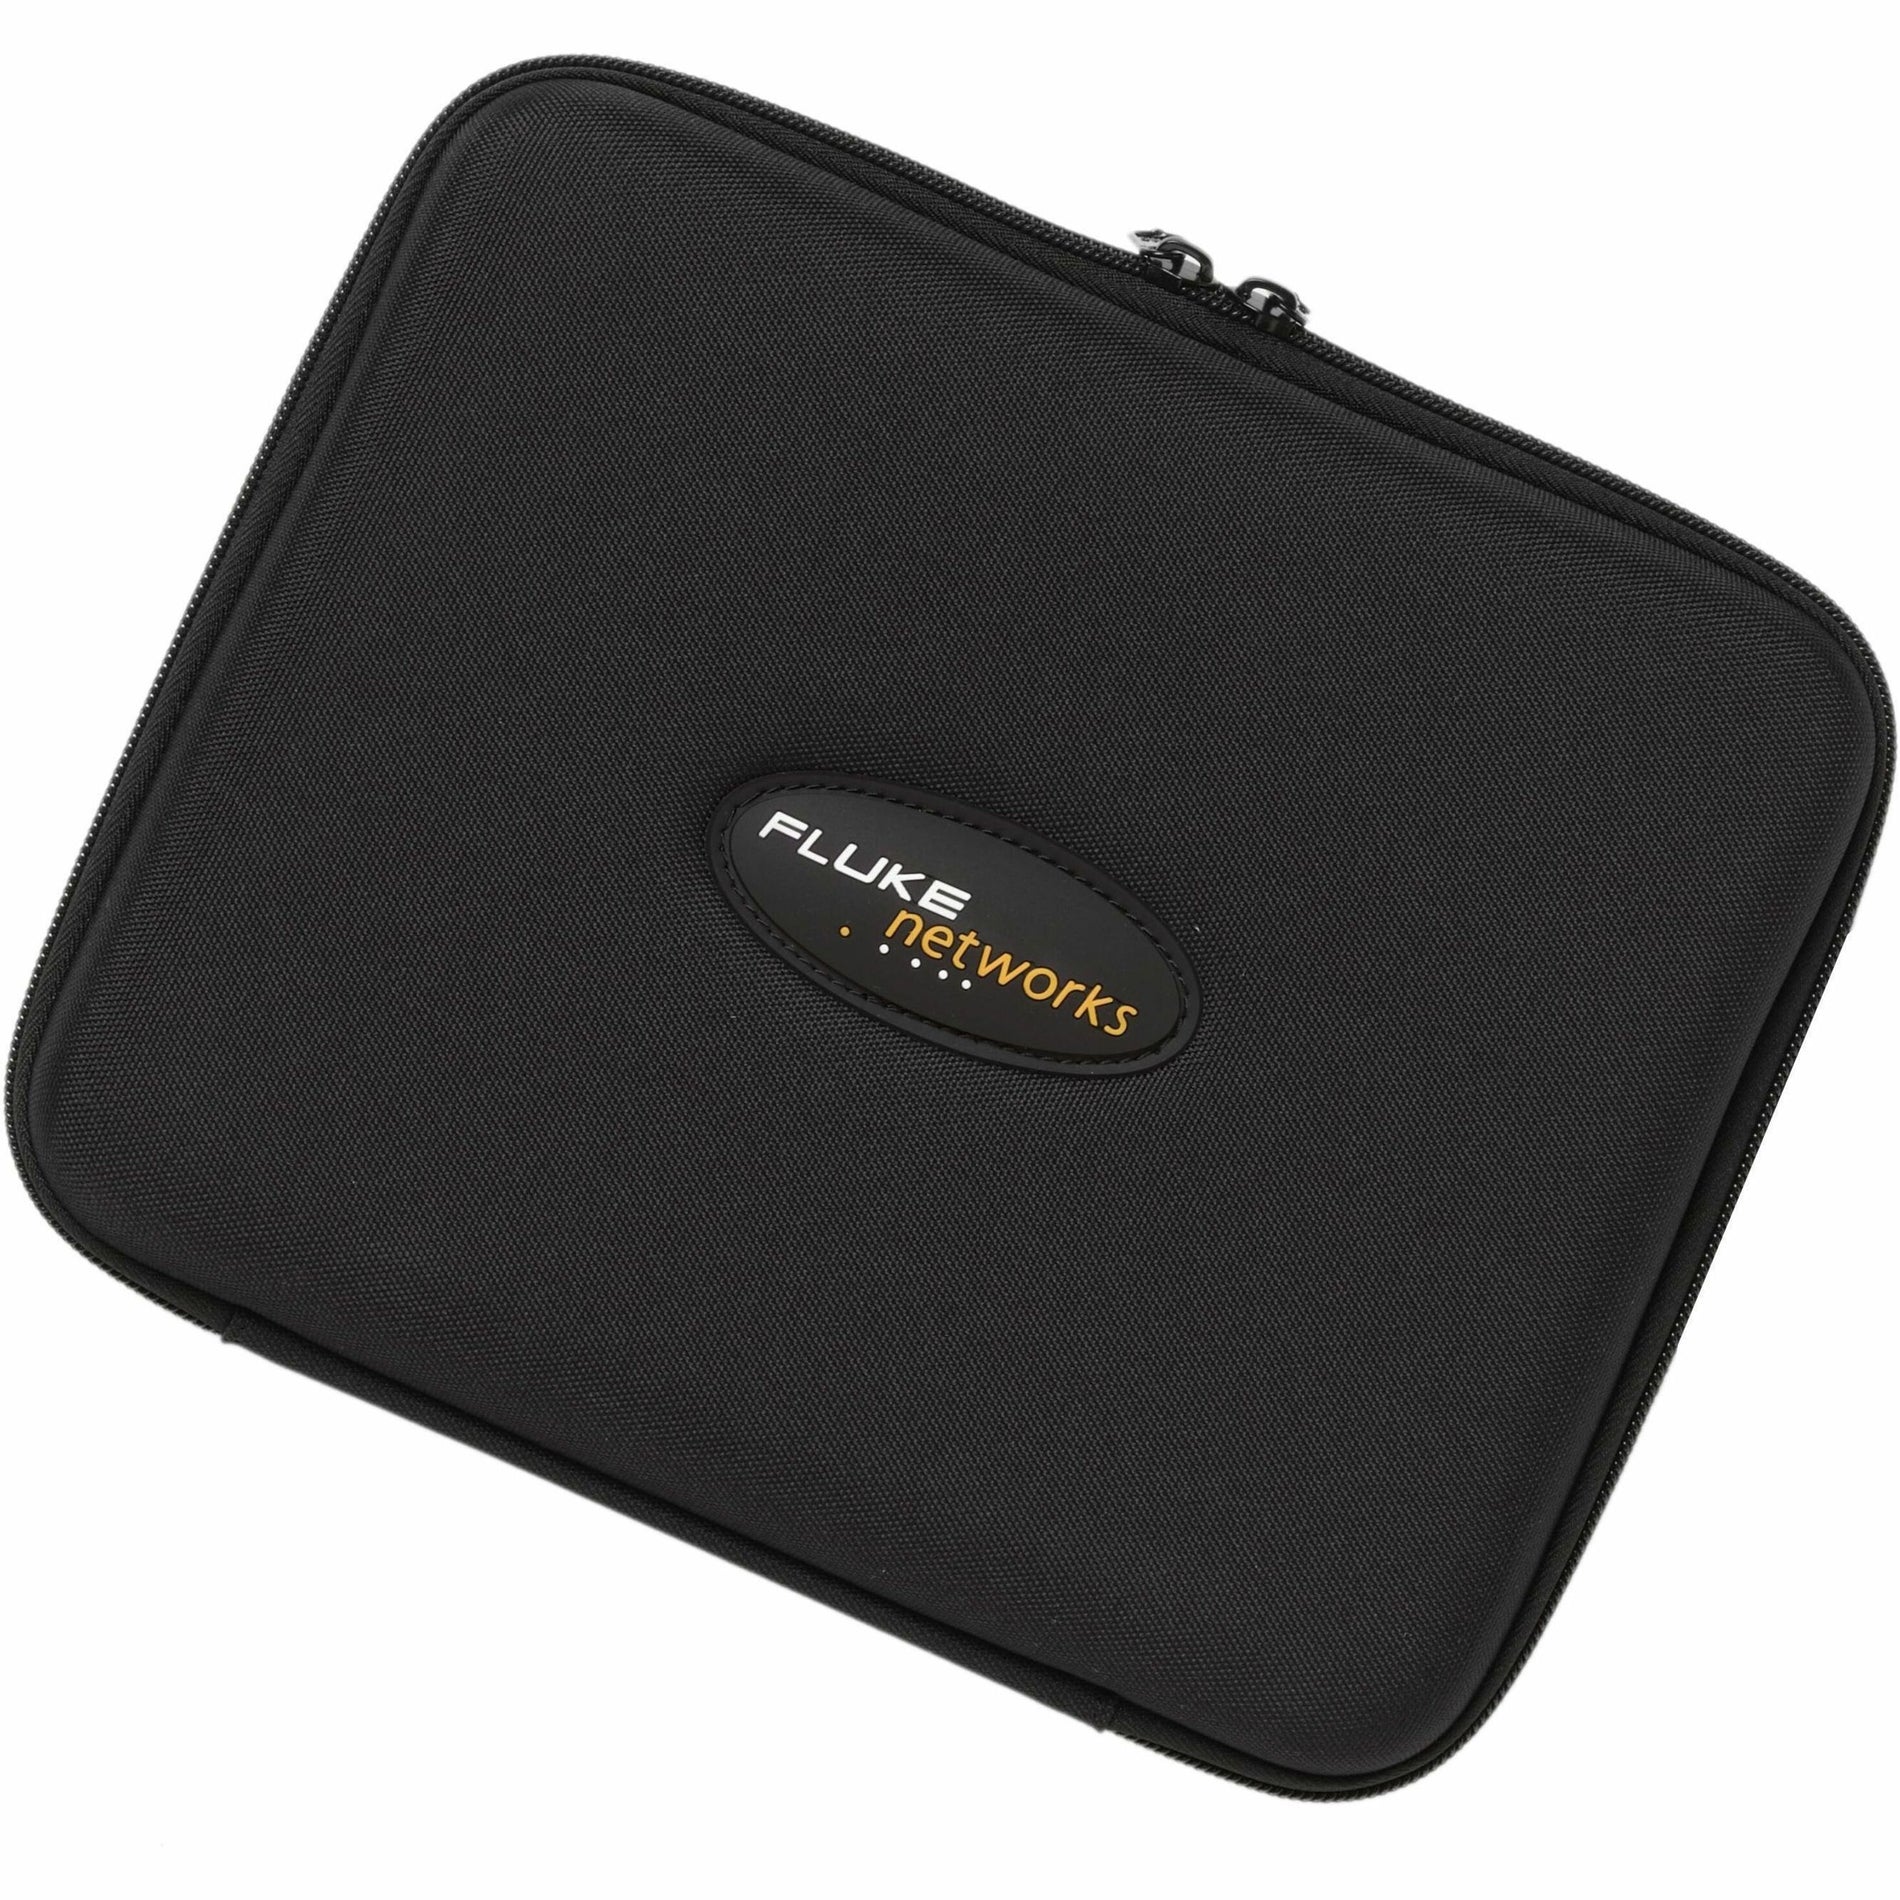 Fluke Networks TRC-CASE Test Equipment Case, Carrying Case for Tools and Test Equipment